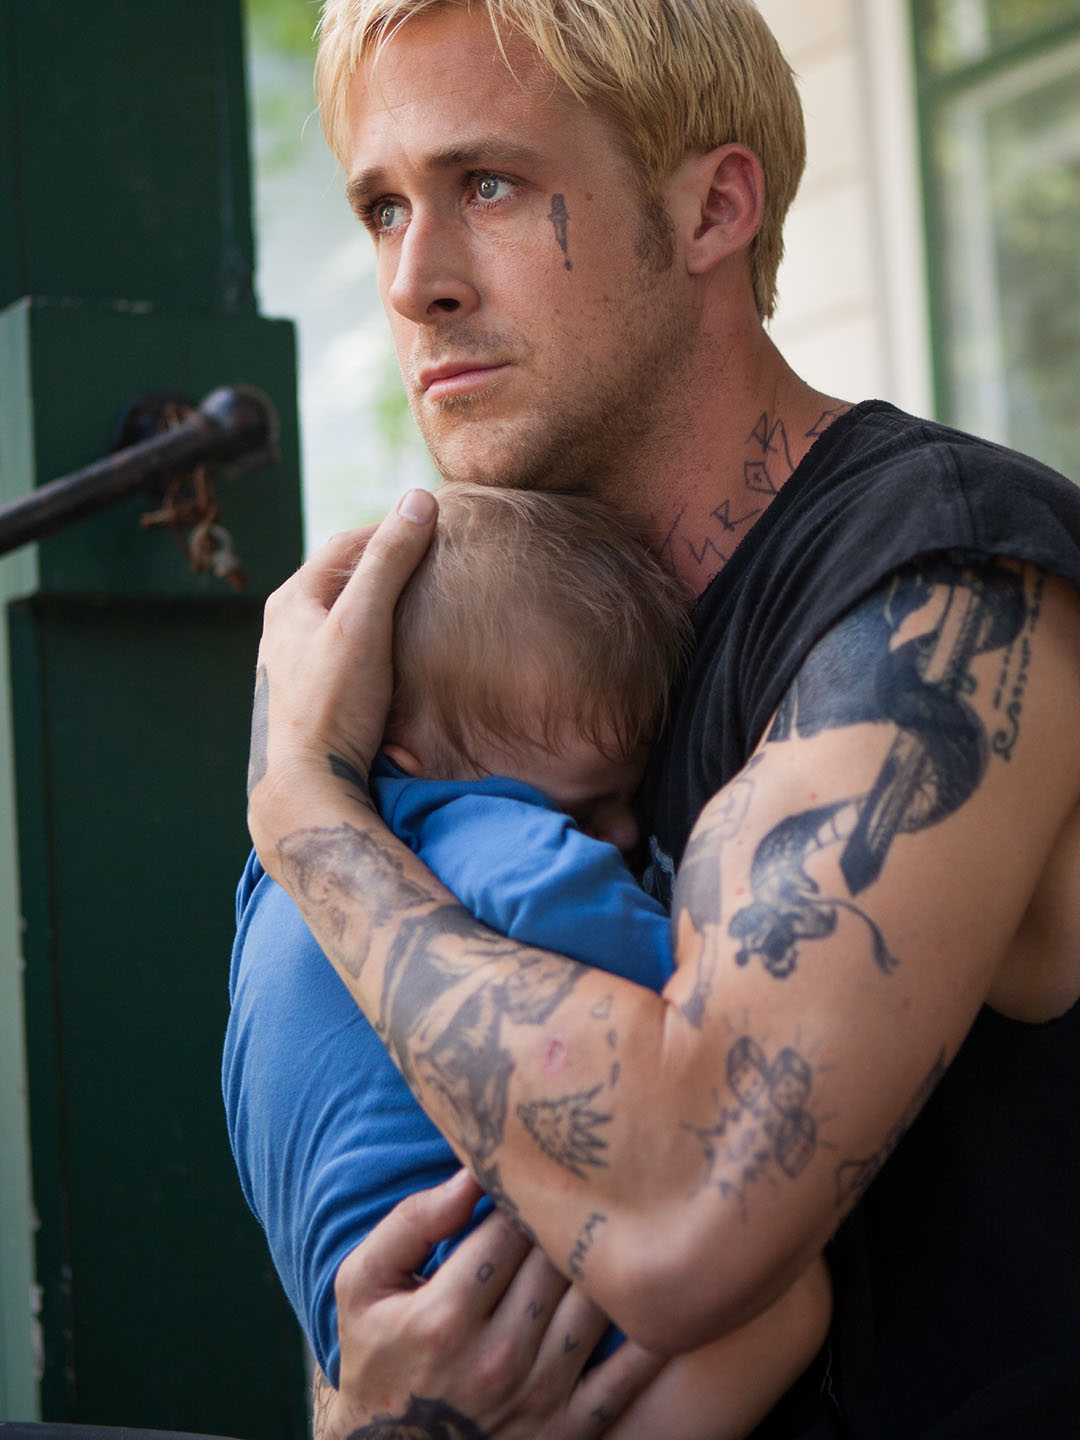 The Place Beyond The Pines Official Clip The First Bank Robbery